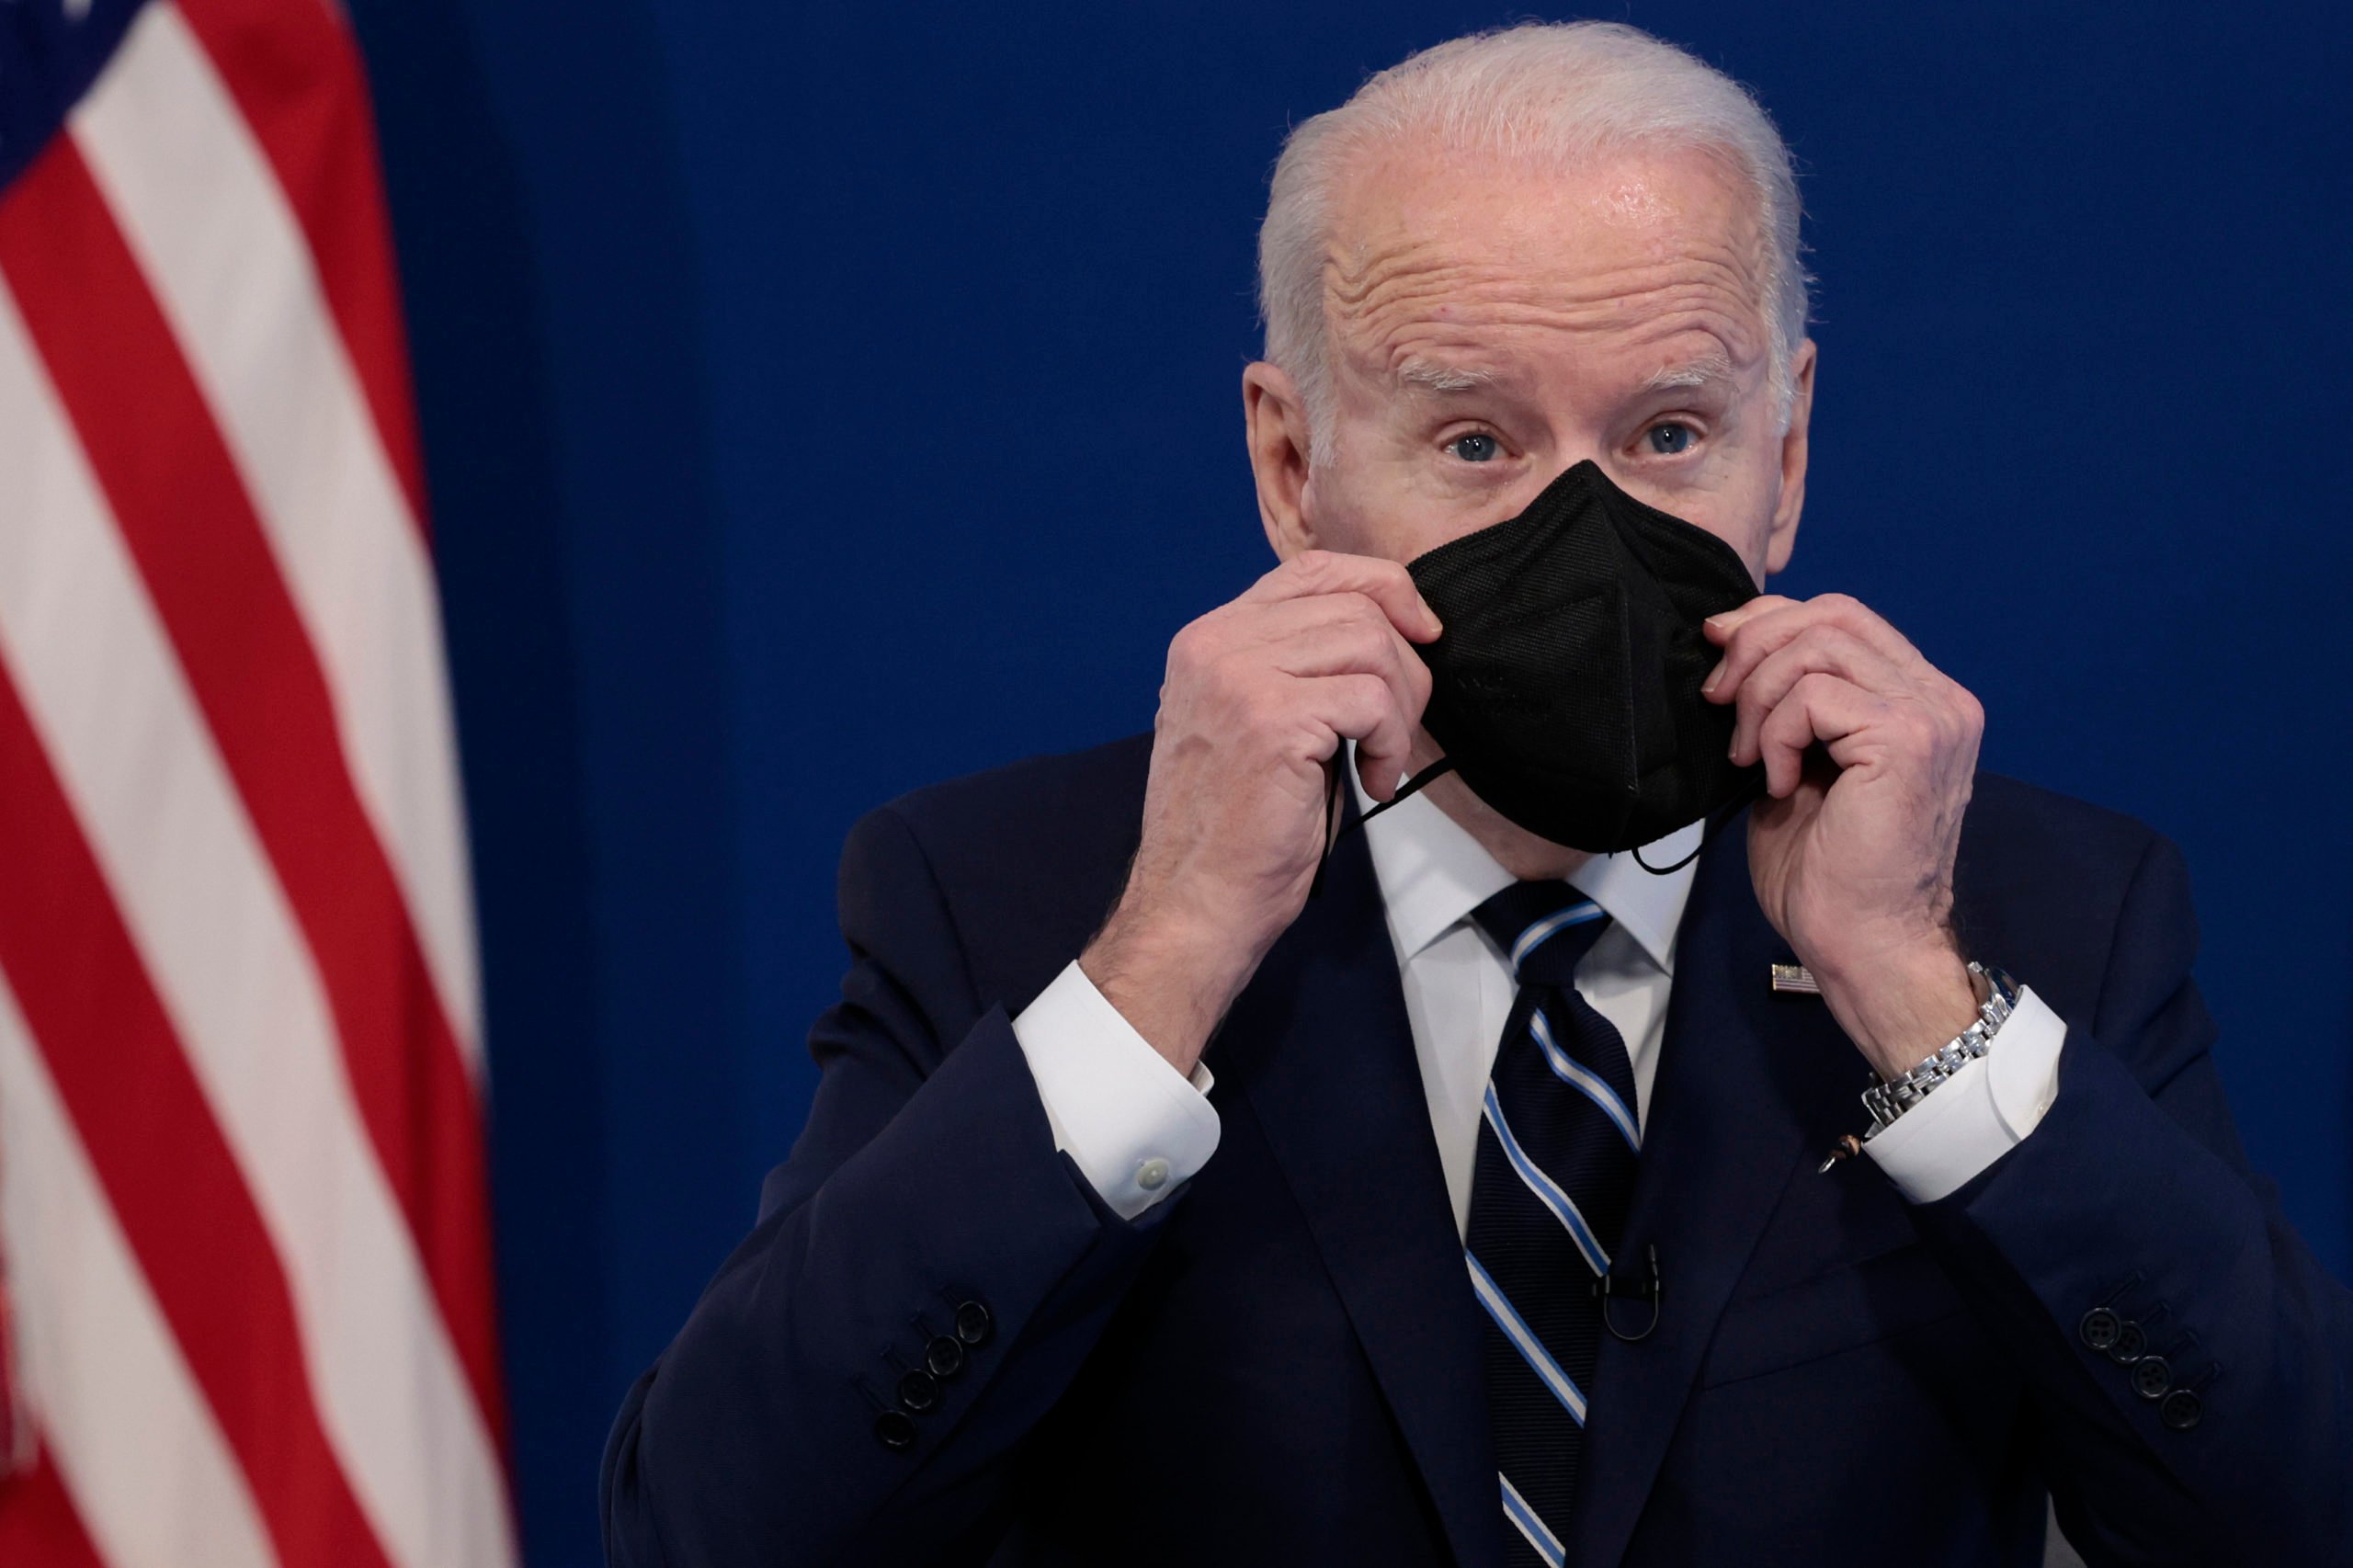 WASHINGTON, DC - JANUARY 13: U.S. President Joe Biden holds a mask as he gives remarks on his administration's response to the surge in COVID-19 cases across the country from the South Court Auditorium in the Eisenhower Executive Office Building on January 13, 2022 in Washington, DC. Photo by Anna Moneymaker/Getty Images